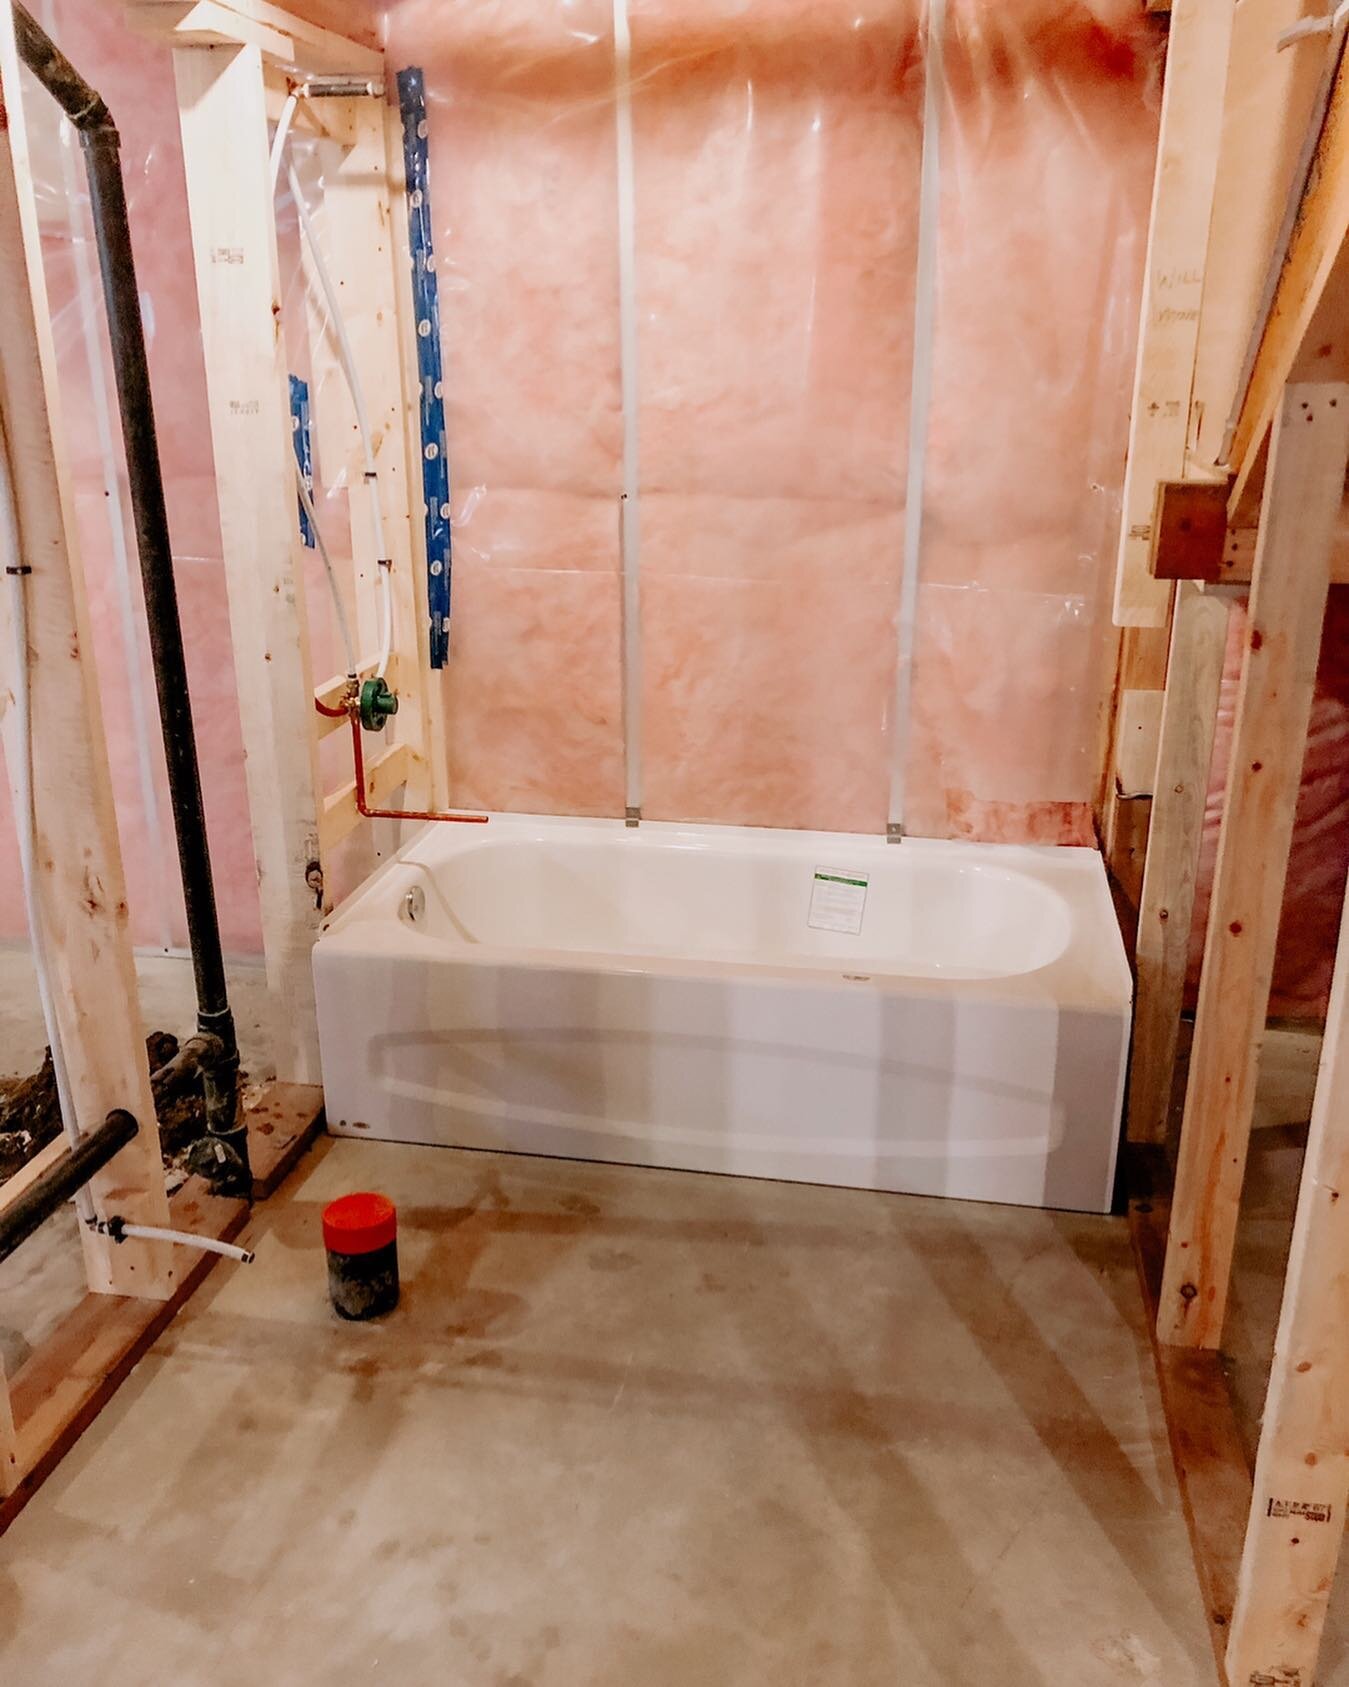 We love to do Basement Bathroom rough-ins! No piping in the ground? Not a big deal, we can add it! We can take your all the way from the idea to a bathroom. Give us a call today 587-589-4096 for a quote.